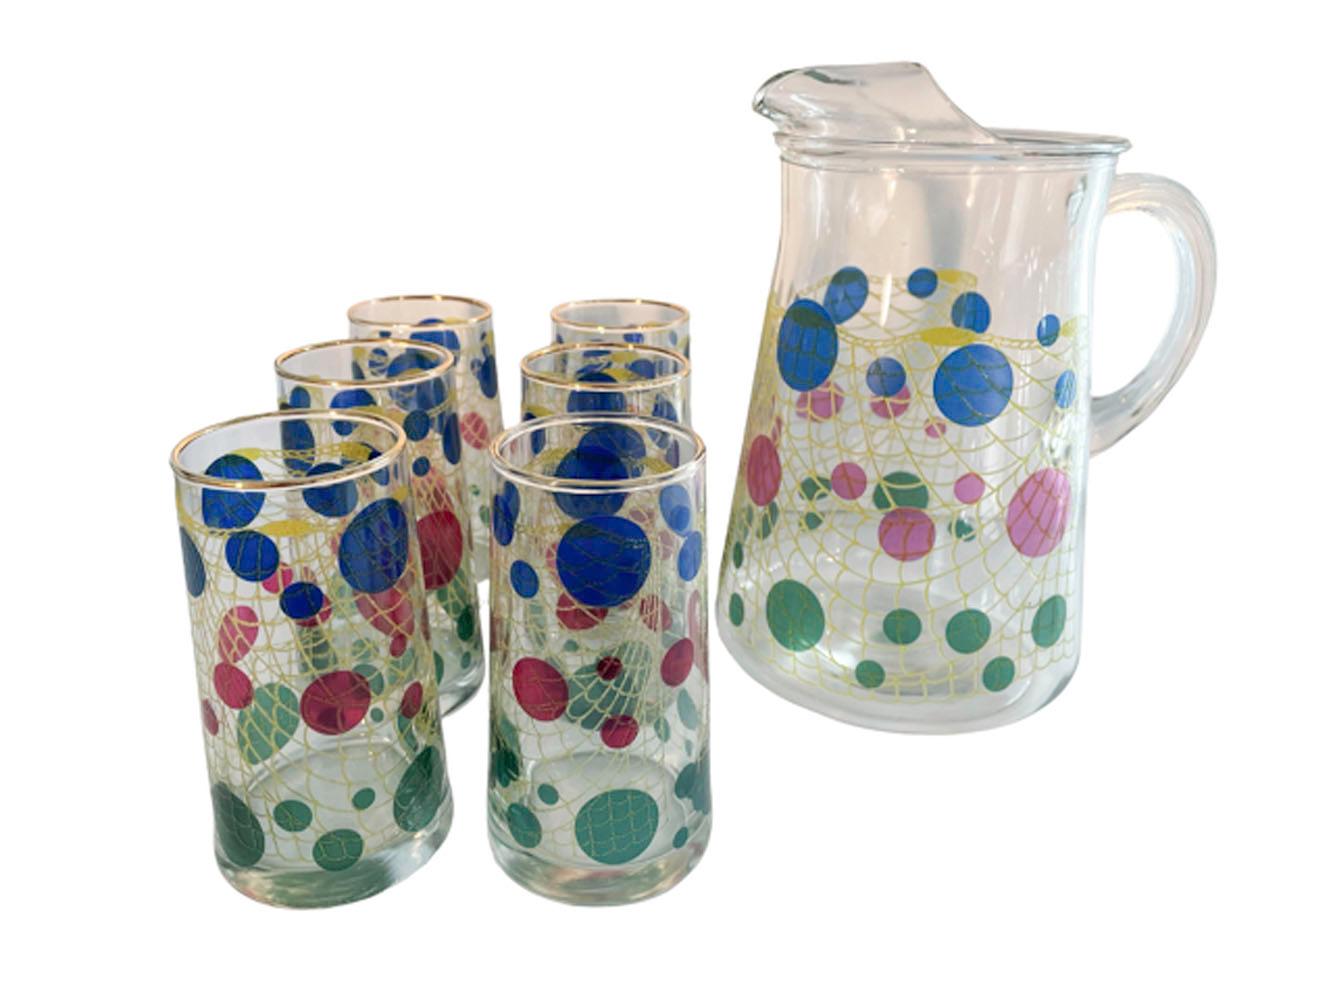 Vintage Bartlett-Collins pitcher and 6 highball glasses in the 'Gibraltar' pattern, decorated with translucent green, red and blue dots of various size arranged on a raised yellow net, giving the impression of glass floats on a fishing net.